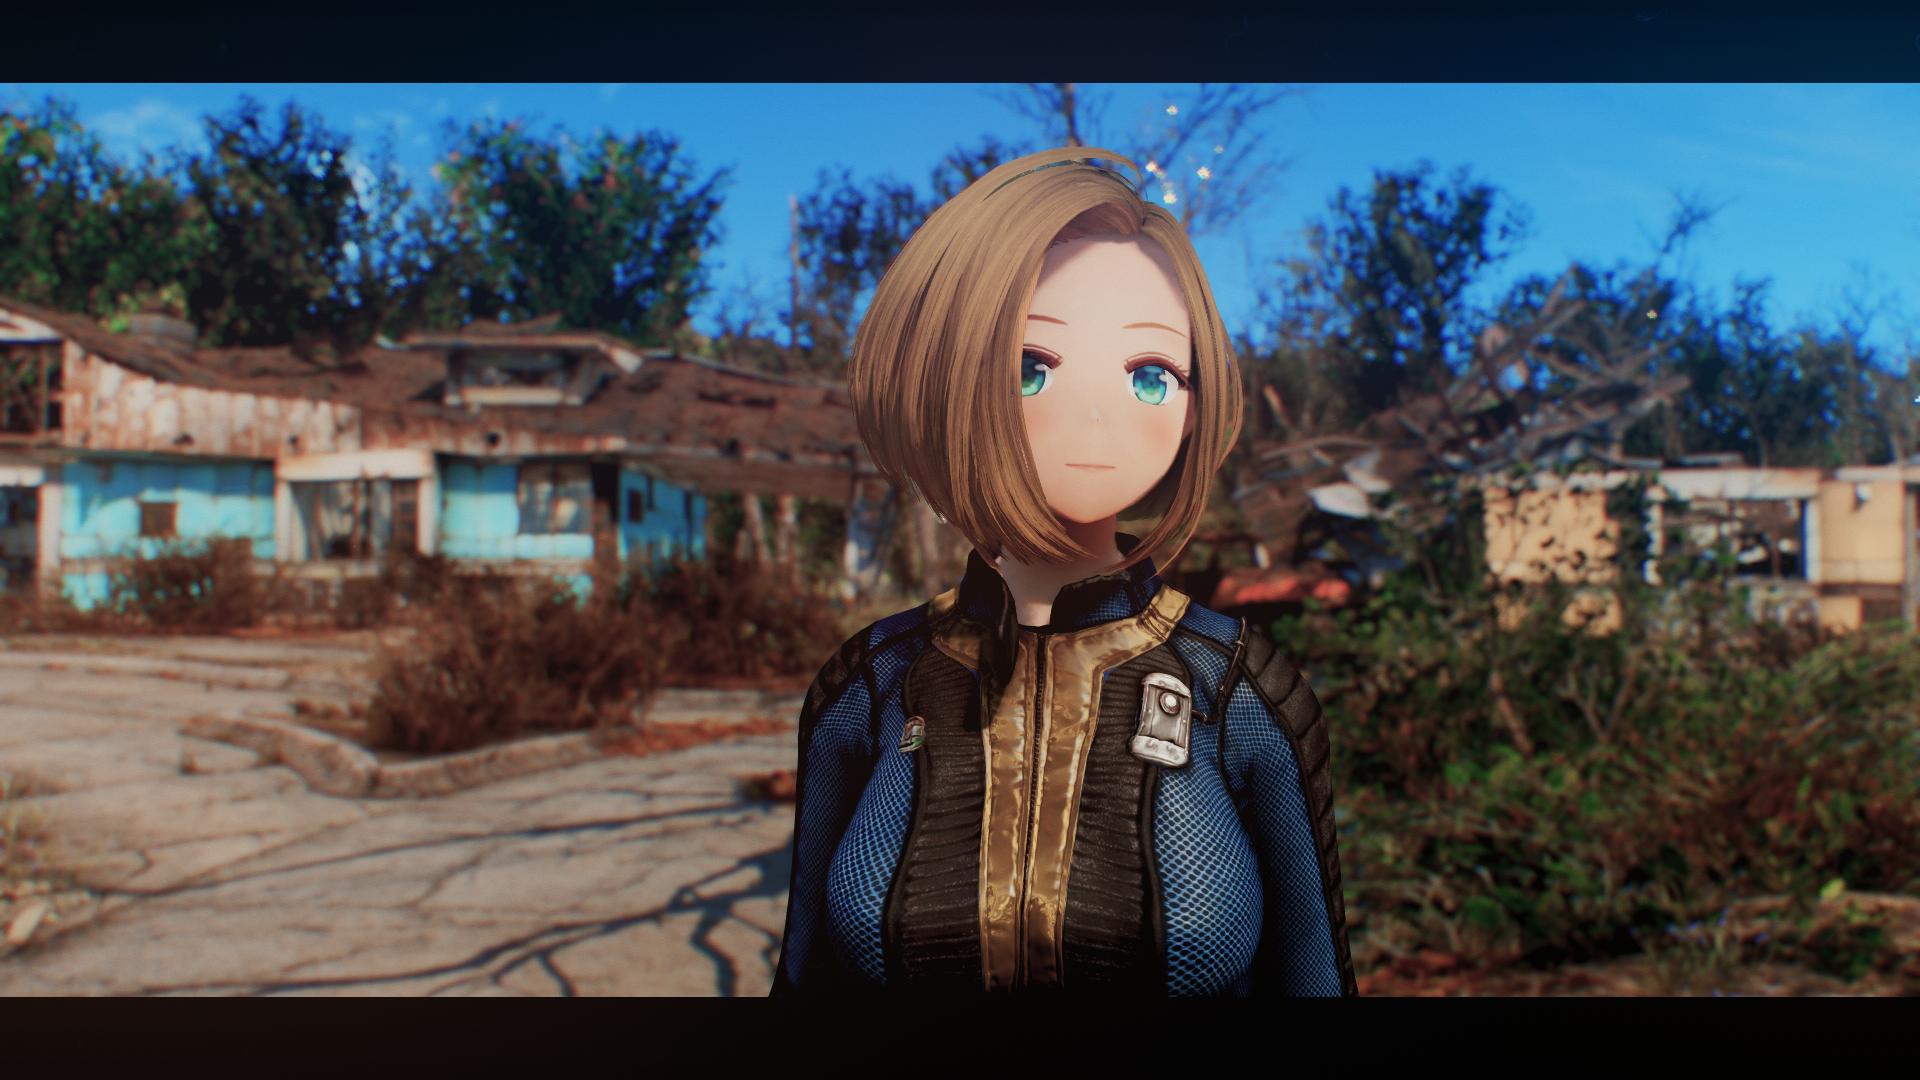 This Fallout 4 Mod Turns the Wasteland Into An Anime | News | Prima Games